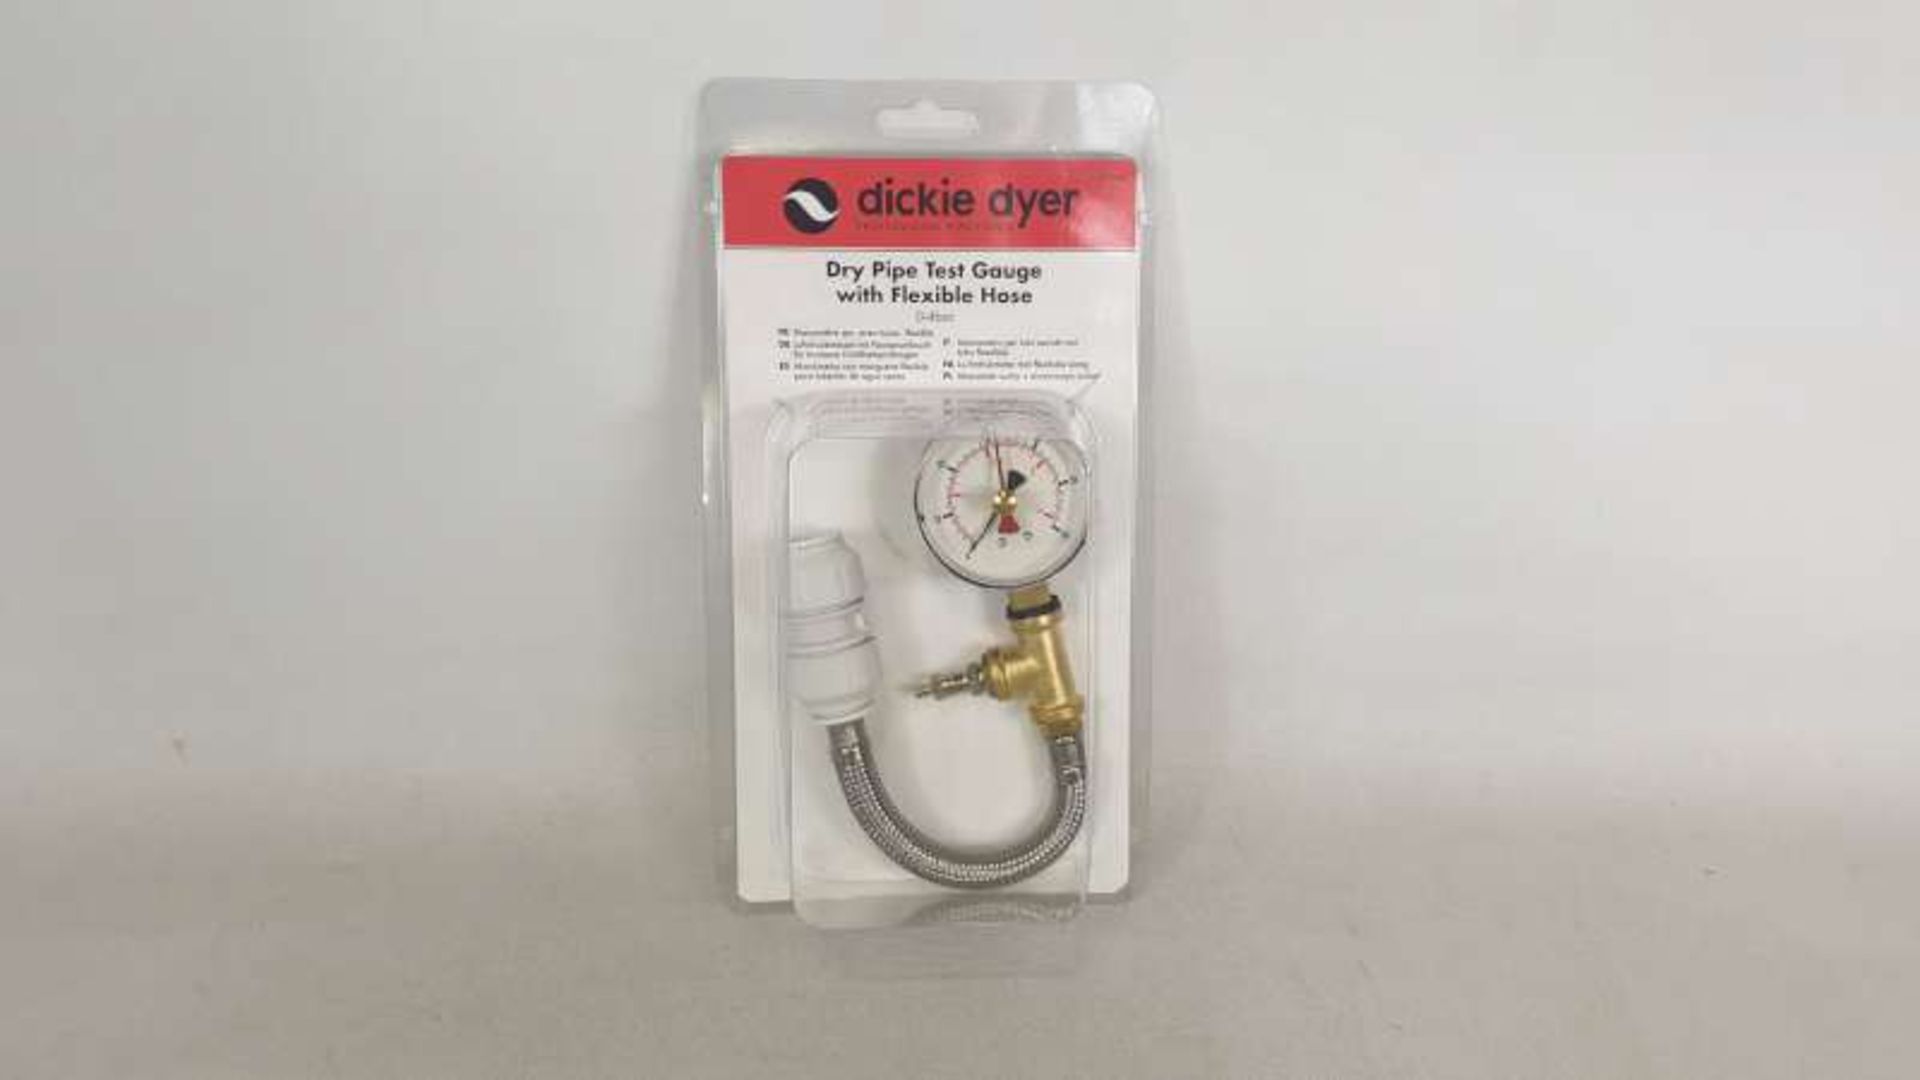 6 X BRAND NEW DICKIE DYER DRY PIPE TEST GAUGE WITH FLEXIBLE HOSE 0-4BAR